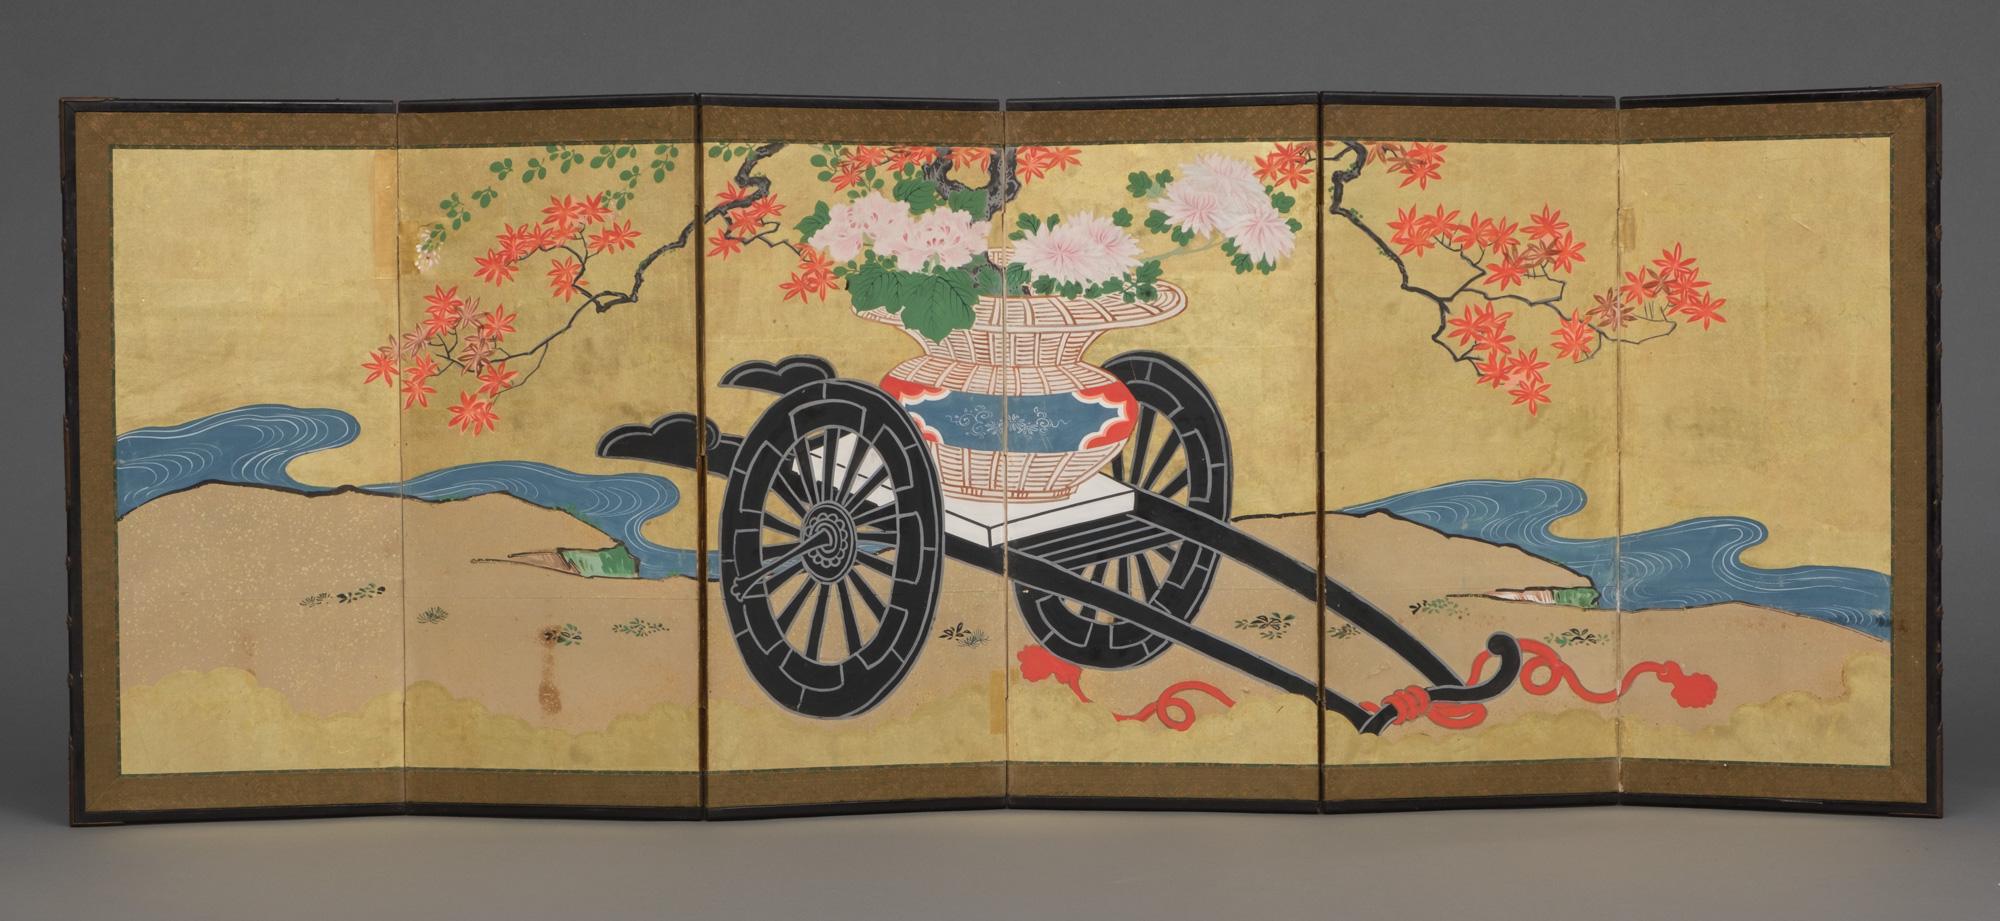 Hand-Painted Pair of Japanese hinagata byôbu 雛形屏風 (small folding screens) with flower carts